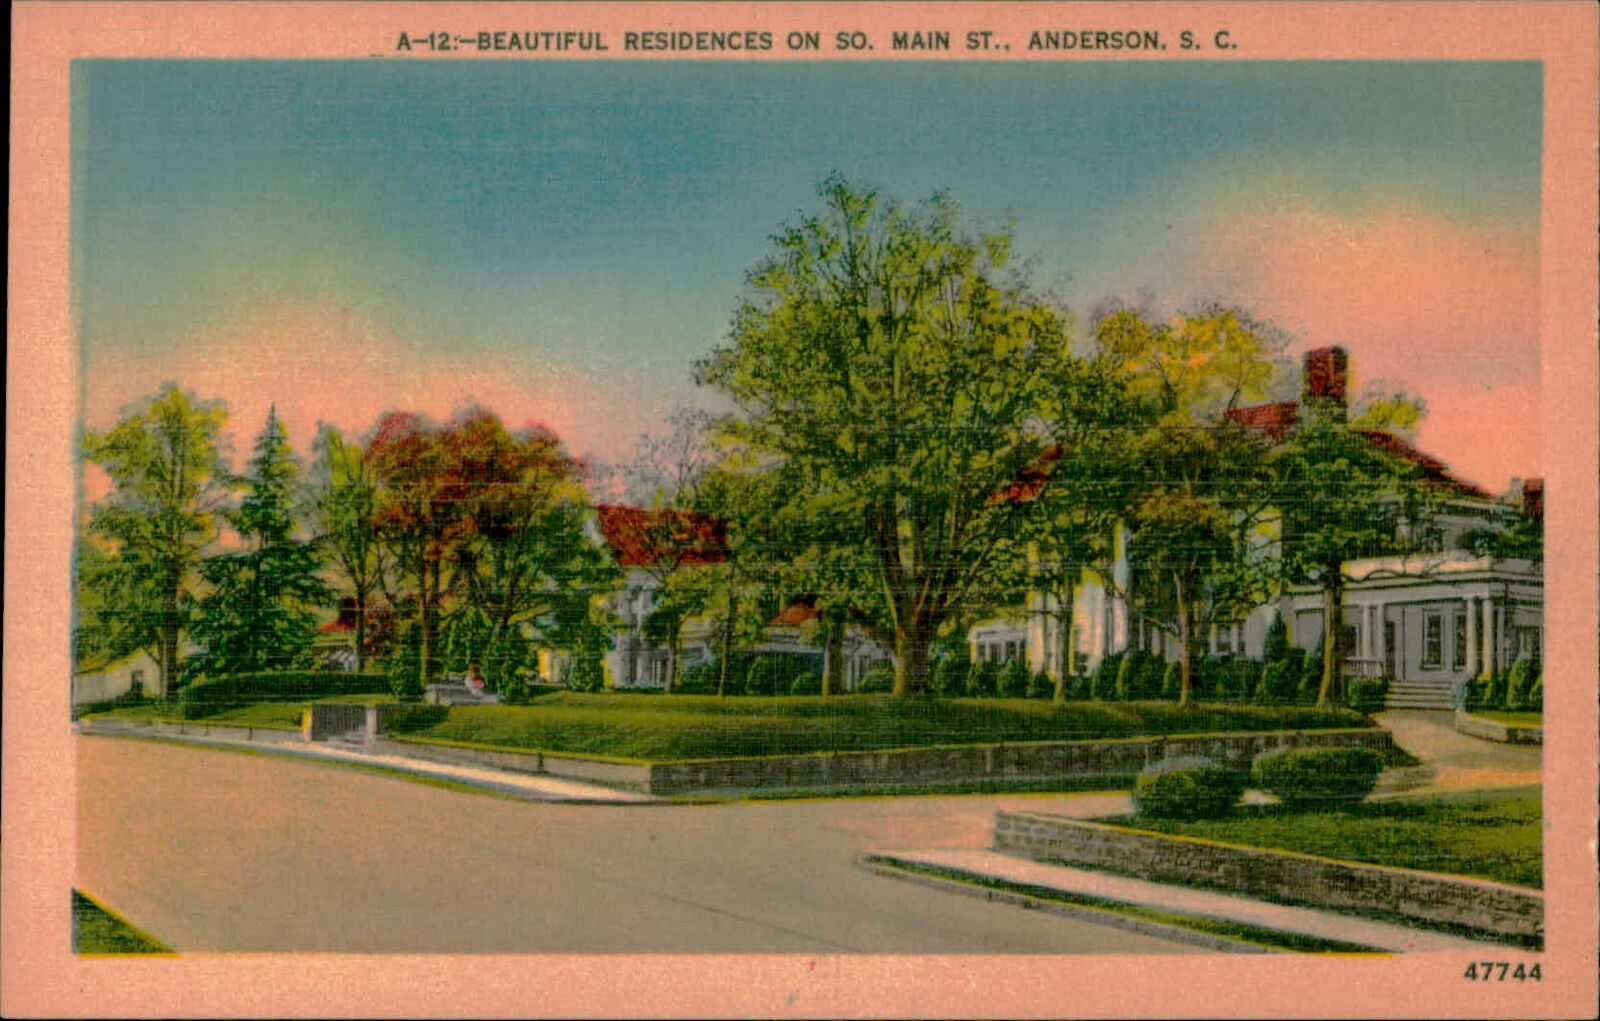 Postcard: A-12:-BEAUTIFUL RESIDENCES ON SO. MAIN ST.. ANDERSON. S. C.